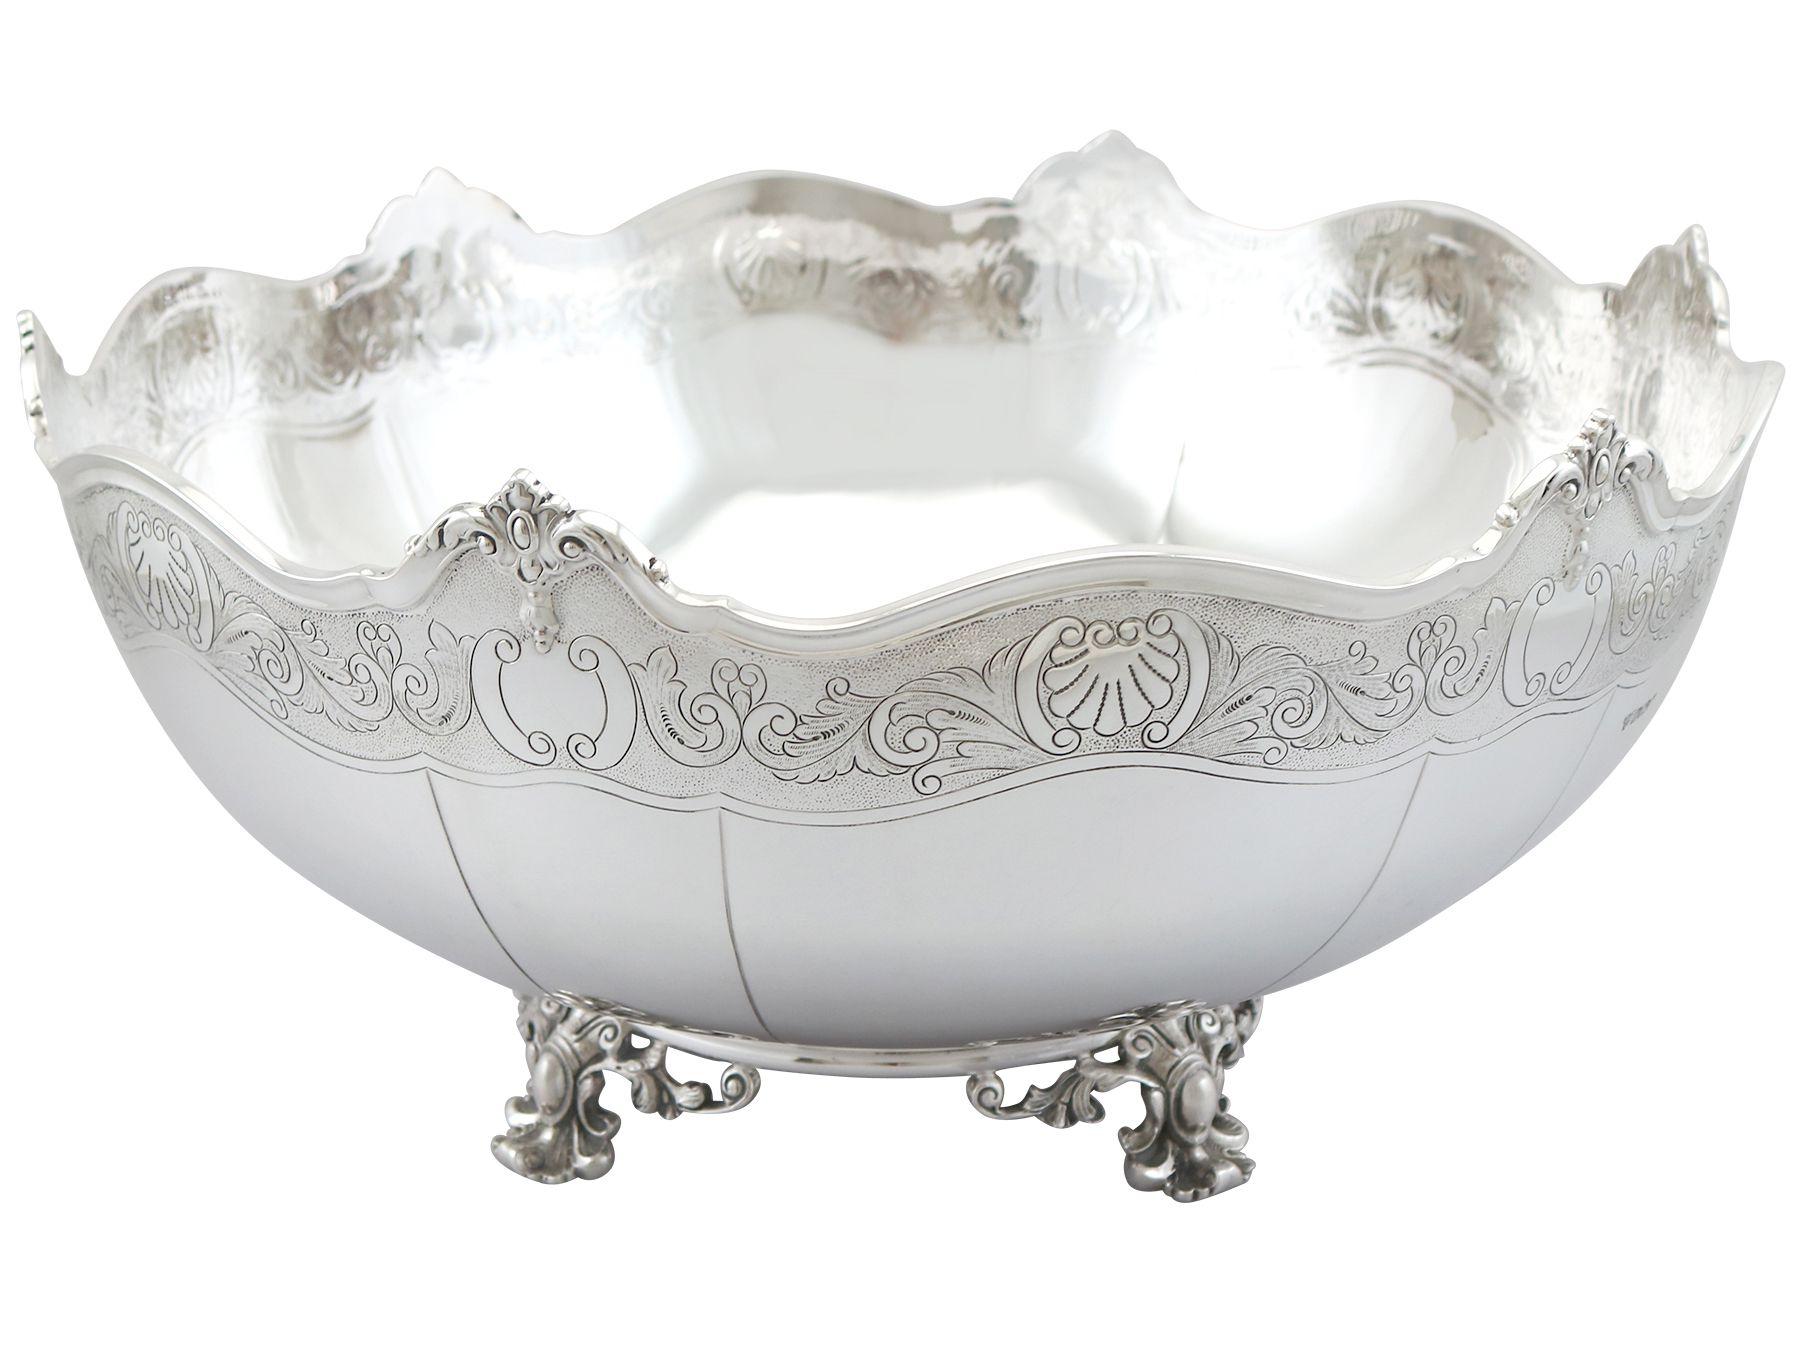 A magnificent, fine and impressive, large vintage English sterling silver presentation bowl; an addition to our vintage silverware collection

This magnificent vintage silver bowl has a circular rounded form.

The incurved panelled body of this